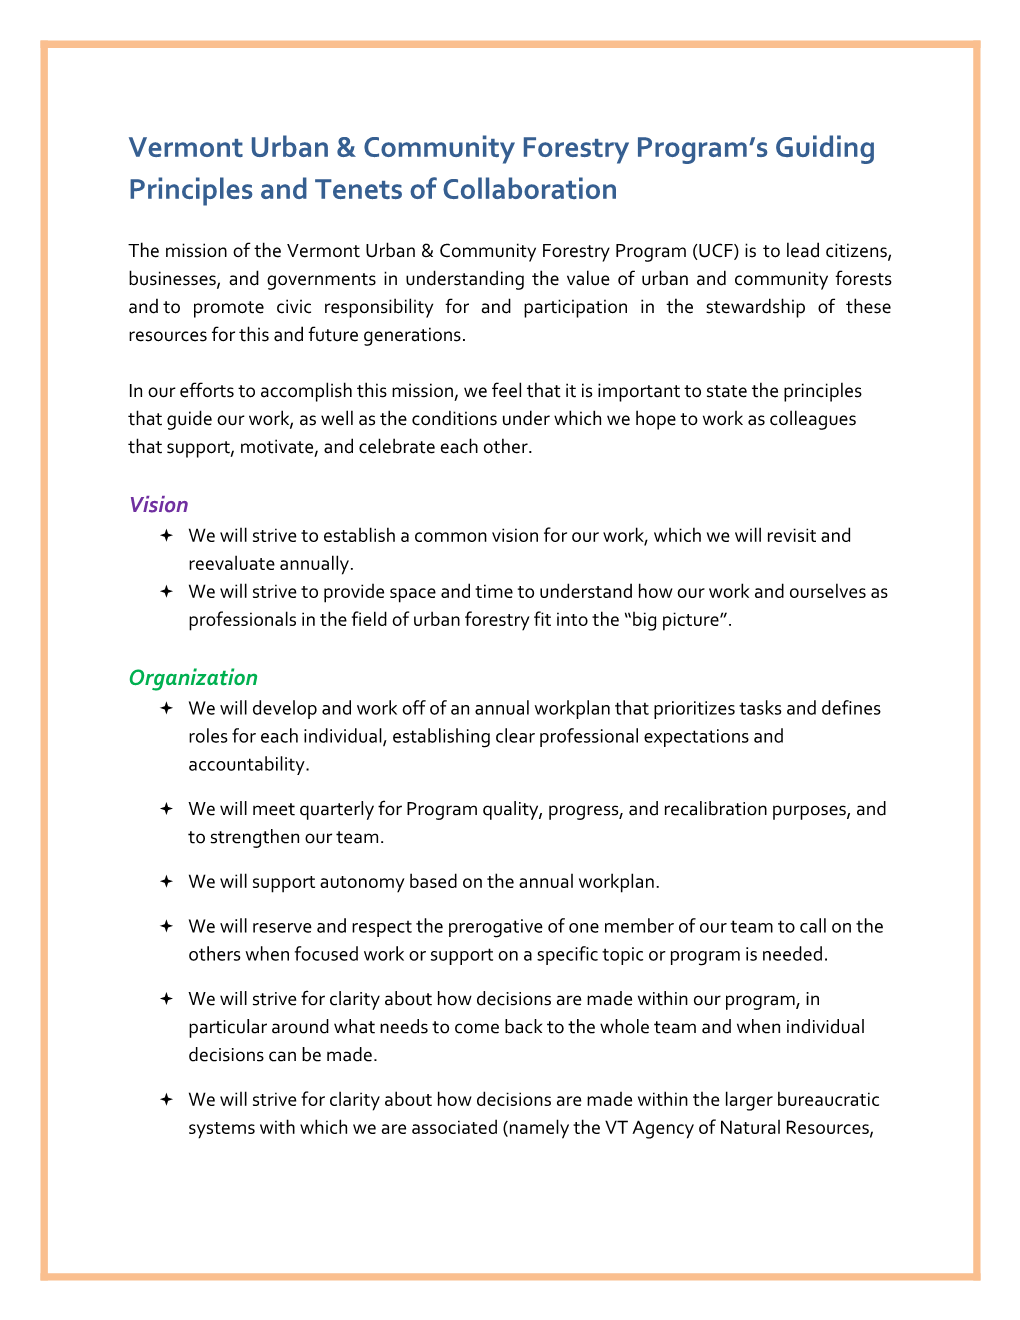 Vermont Urban & Community Forestry Program Sguiding Principles and Tenets of Collaboration